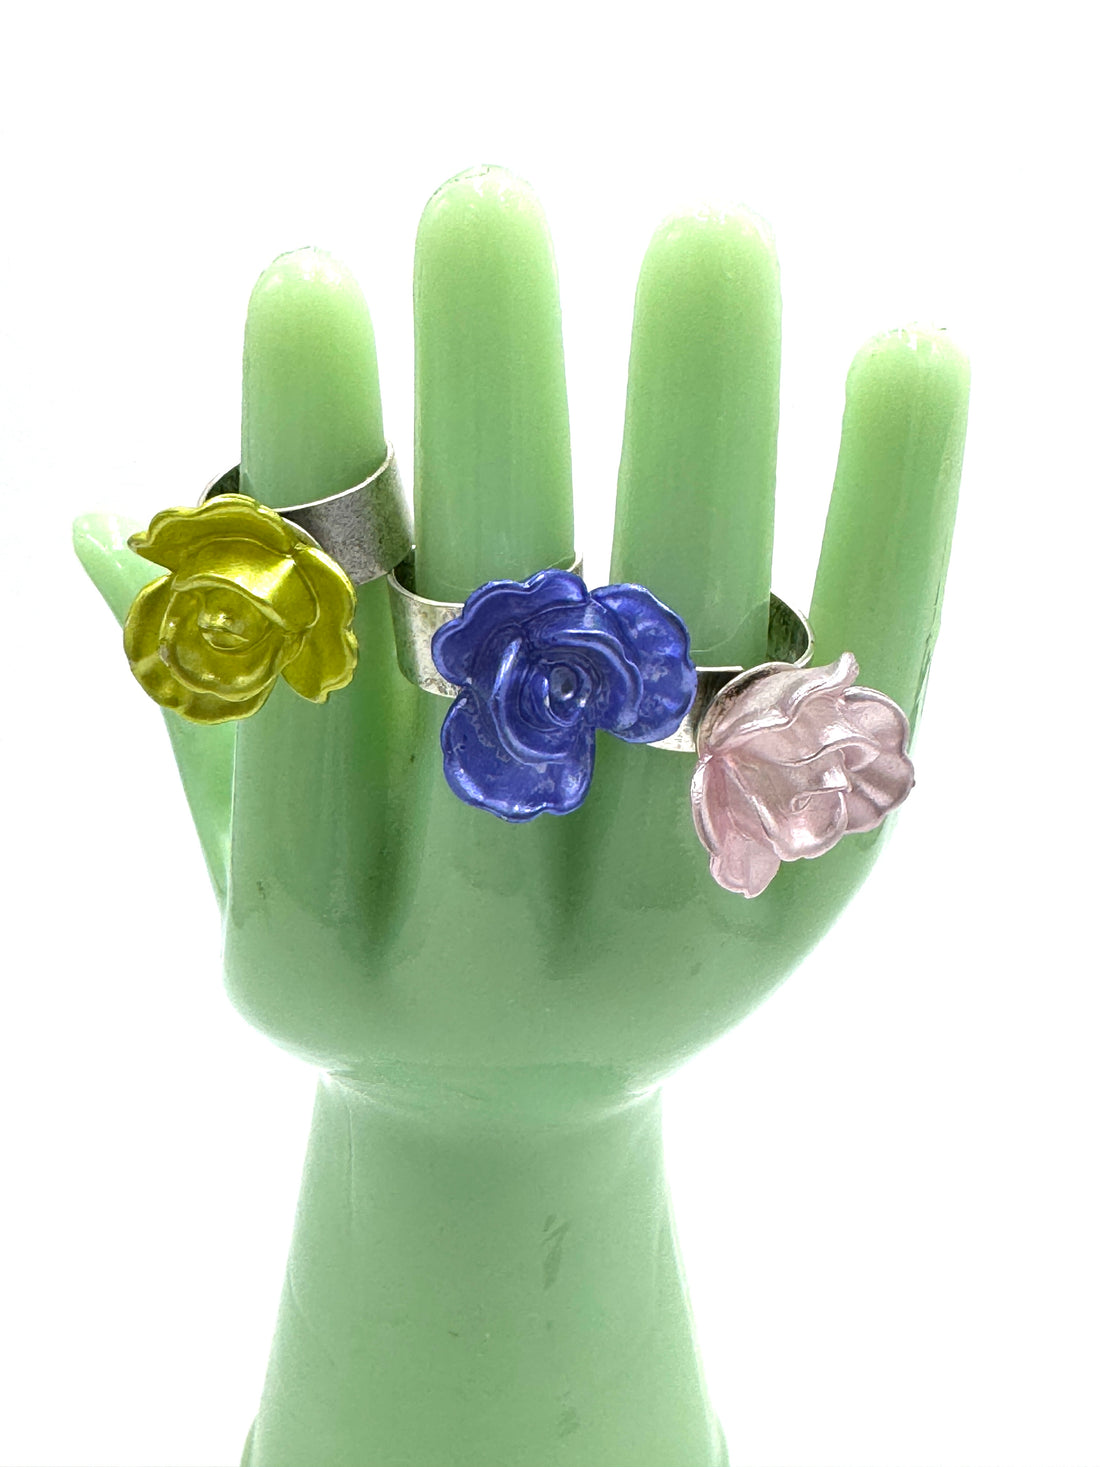 3 corsage rings on a green hand